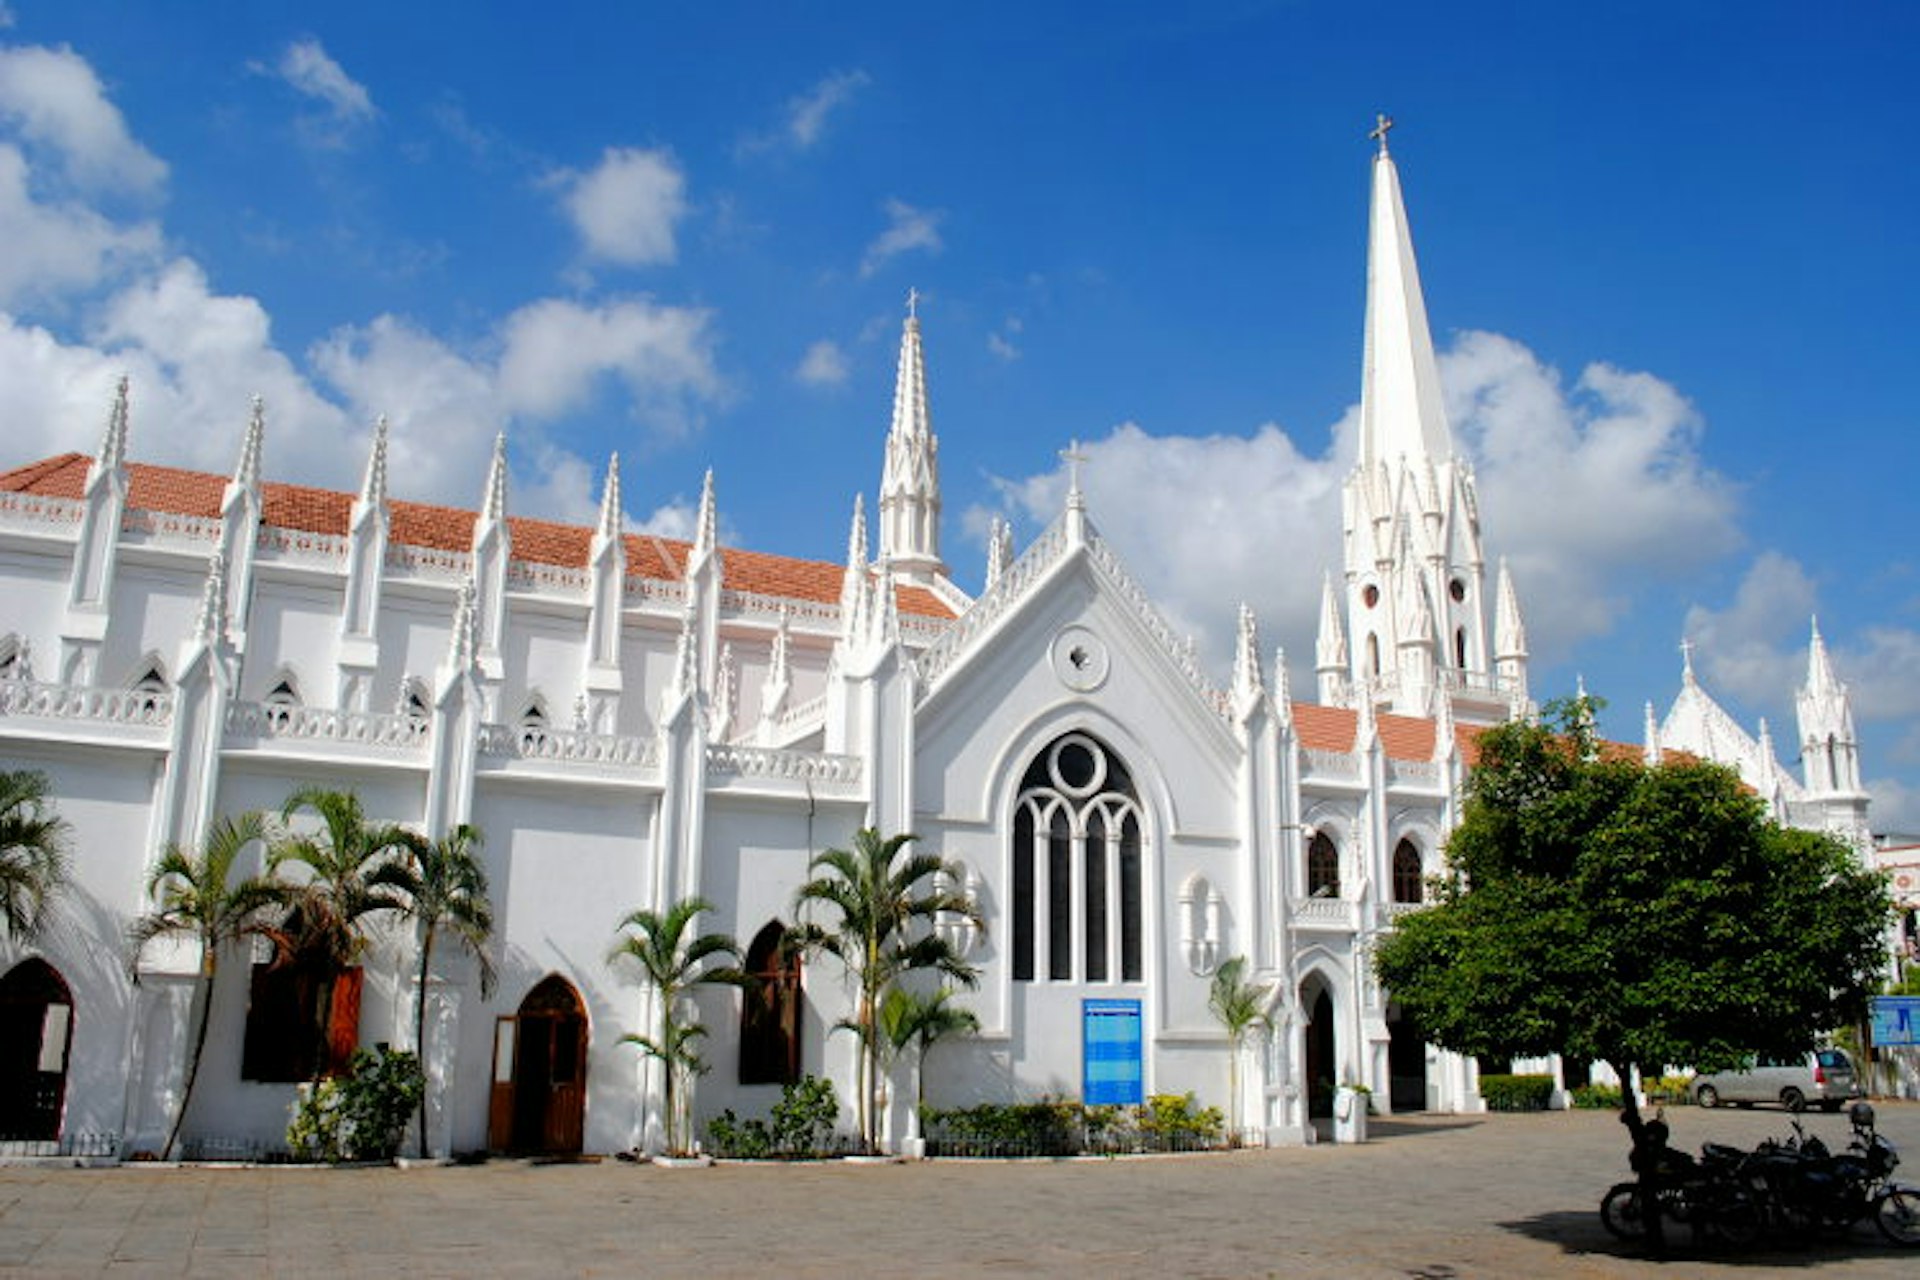 Façade of San Thome Cathedral, Mylapore. Image by Simon Antony / CC BY 2.0.